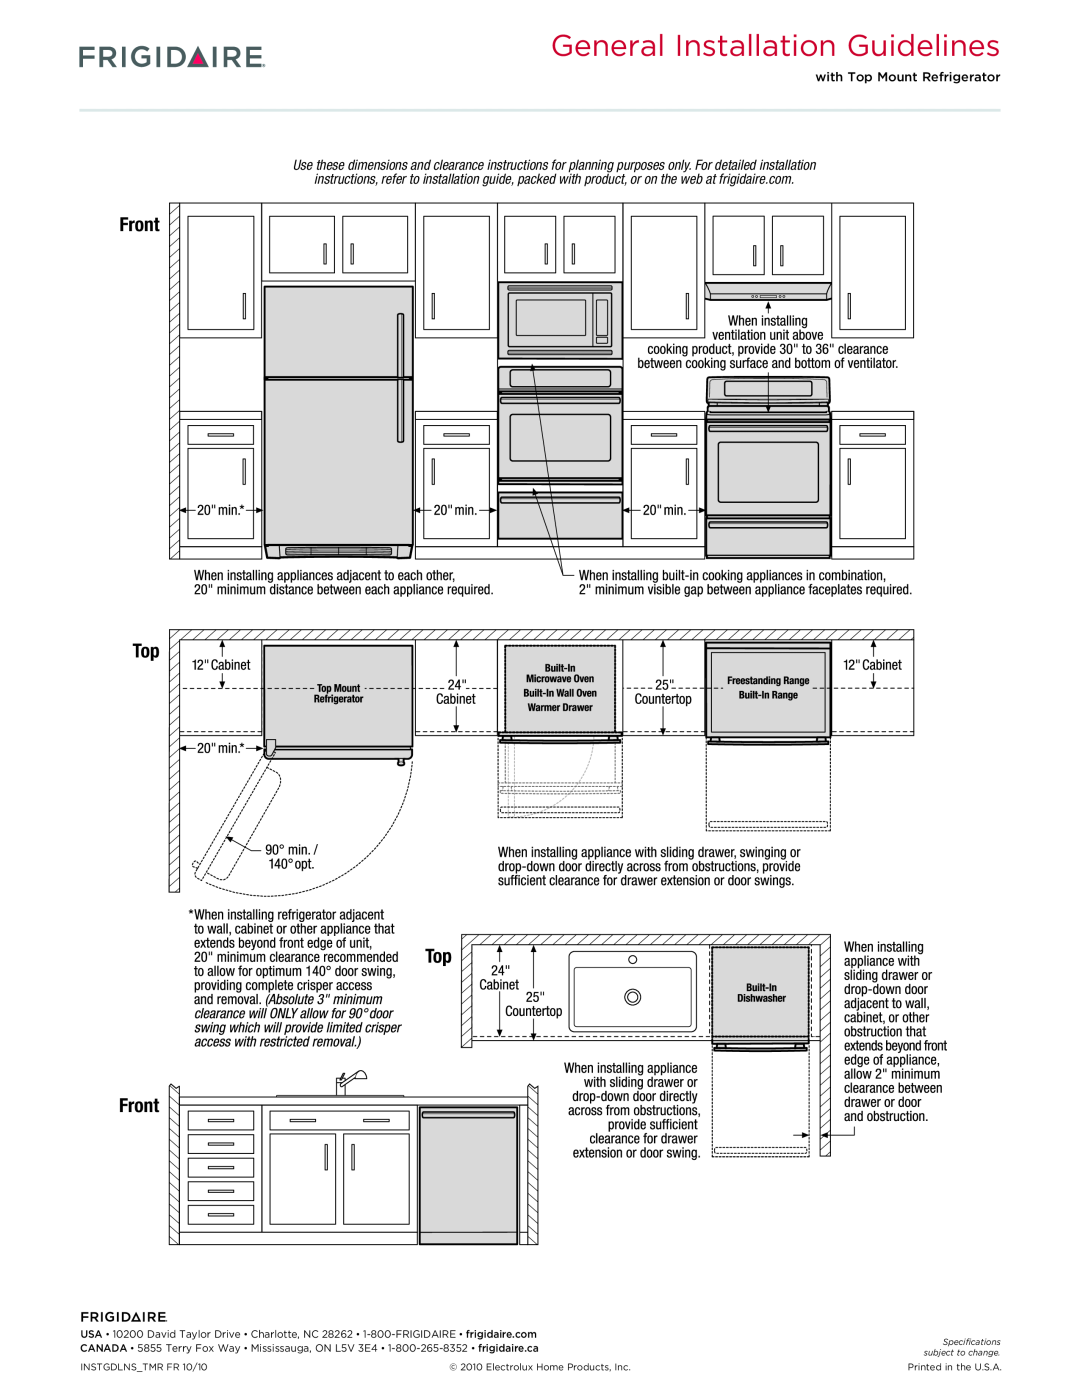 Frigidaire FGES3045K F/W/B dimensions General Installation Guidelines, Top Front, with Top Mount Refrigerator 